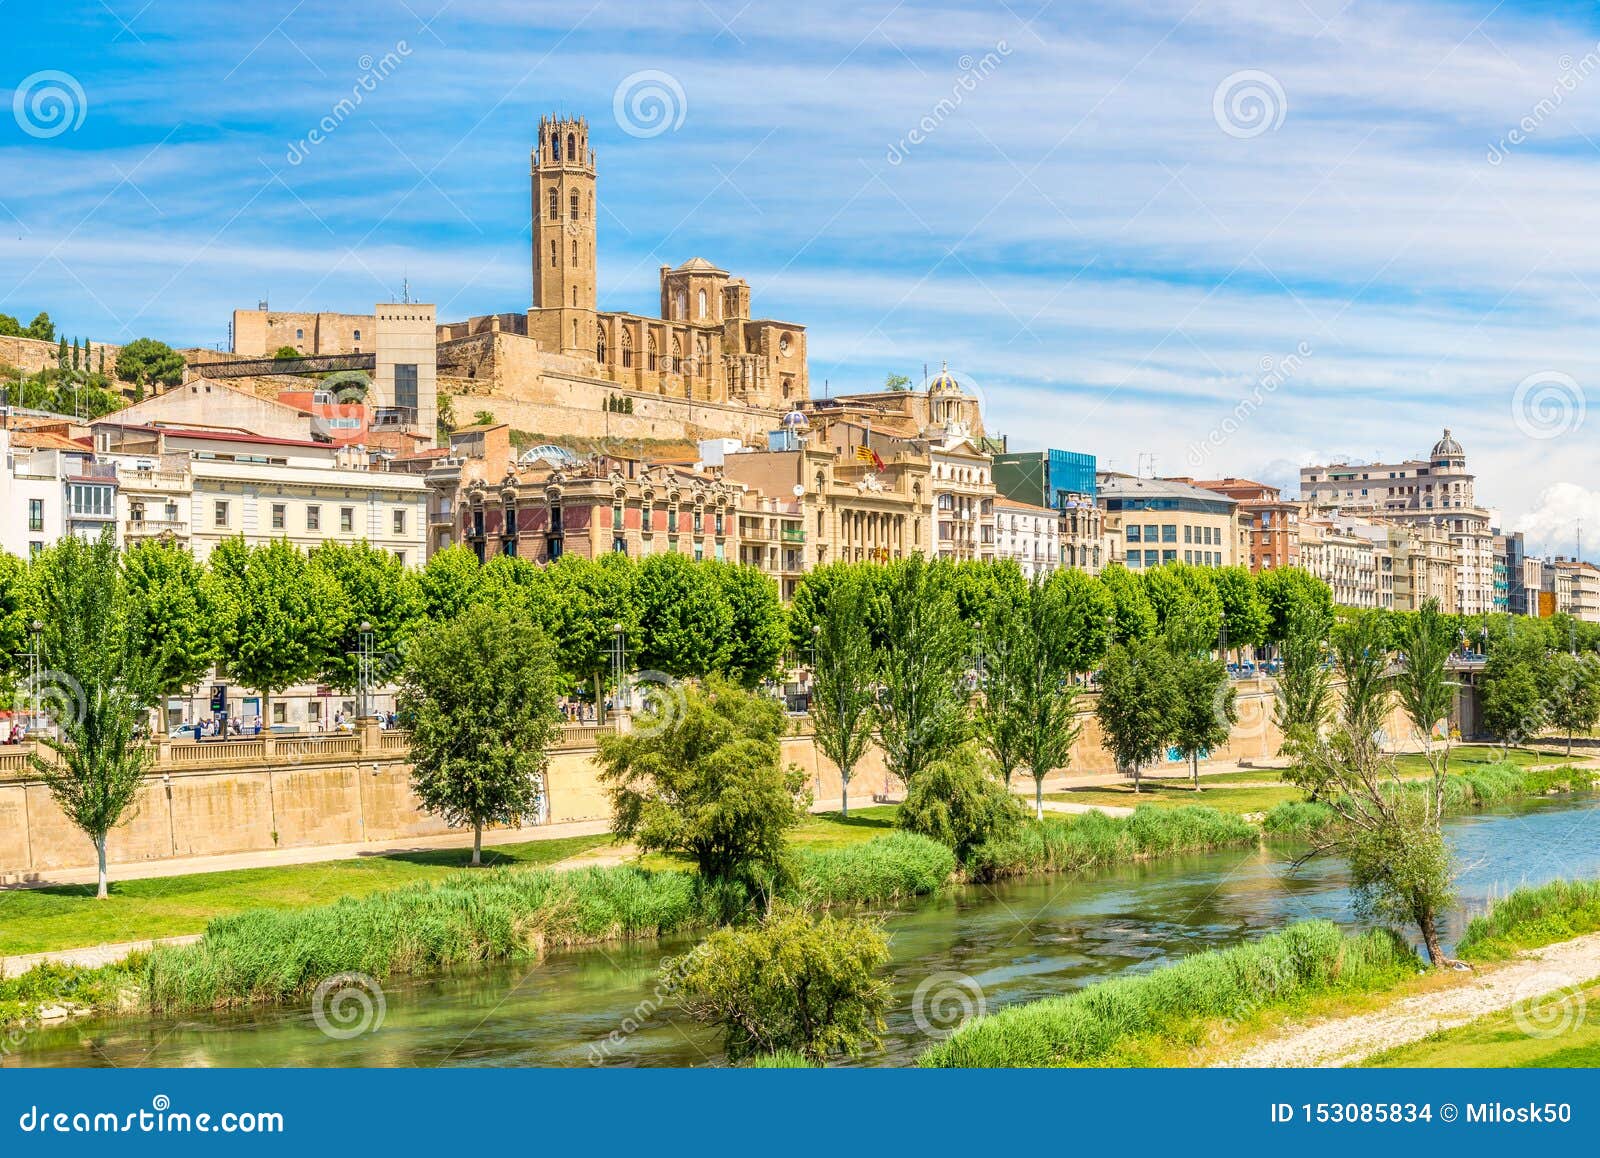 view at the old cathedral seu vella with segre river in lleida - spain